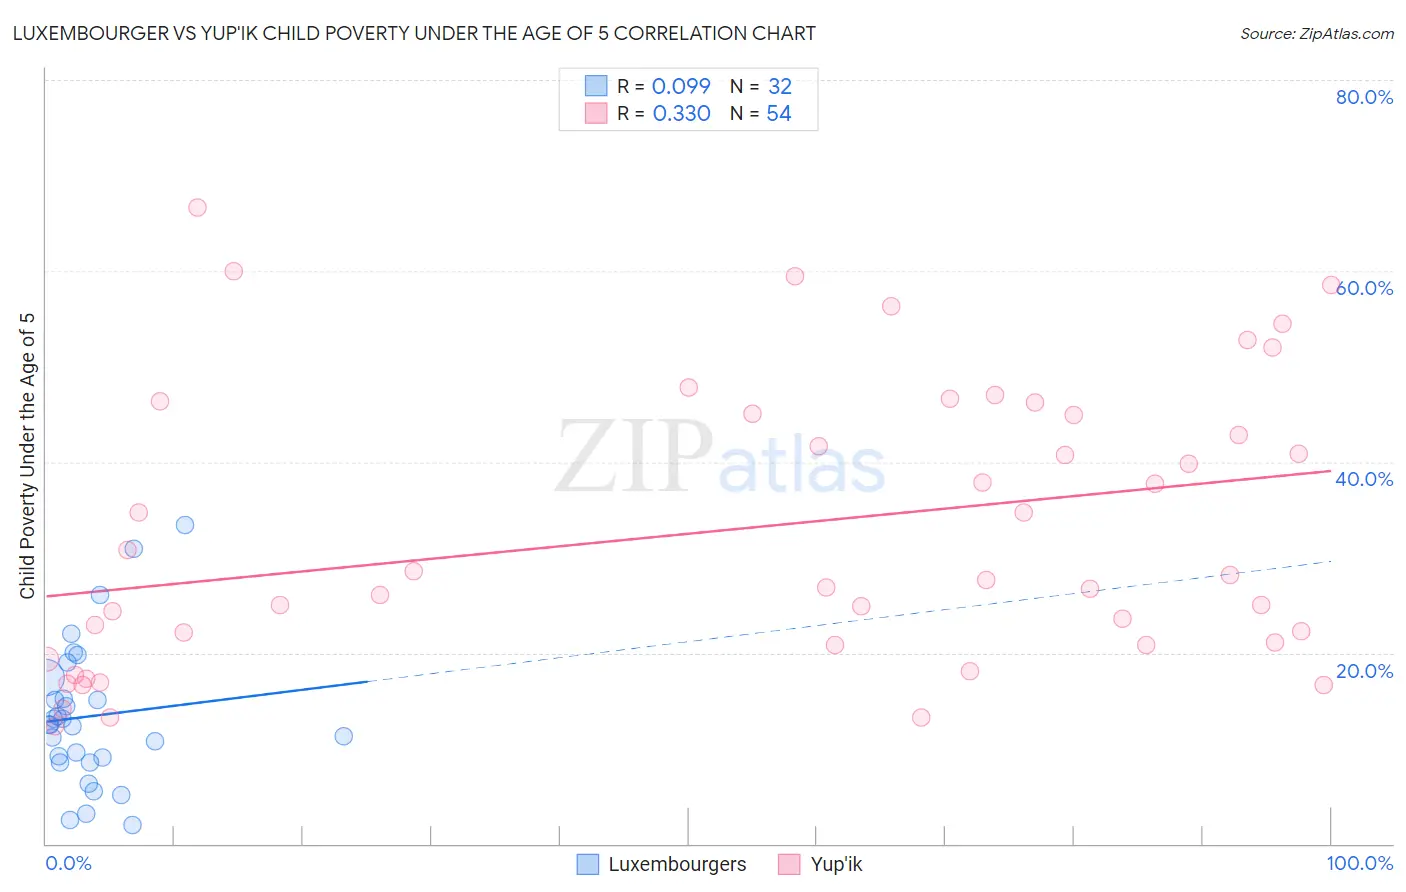 Luxembourger vs Yup'ik Child Poverty Under the Age of 5